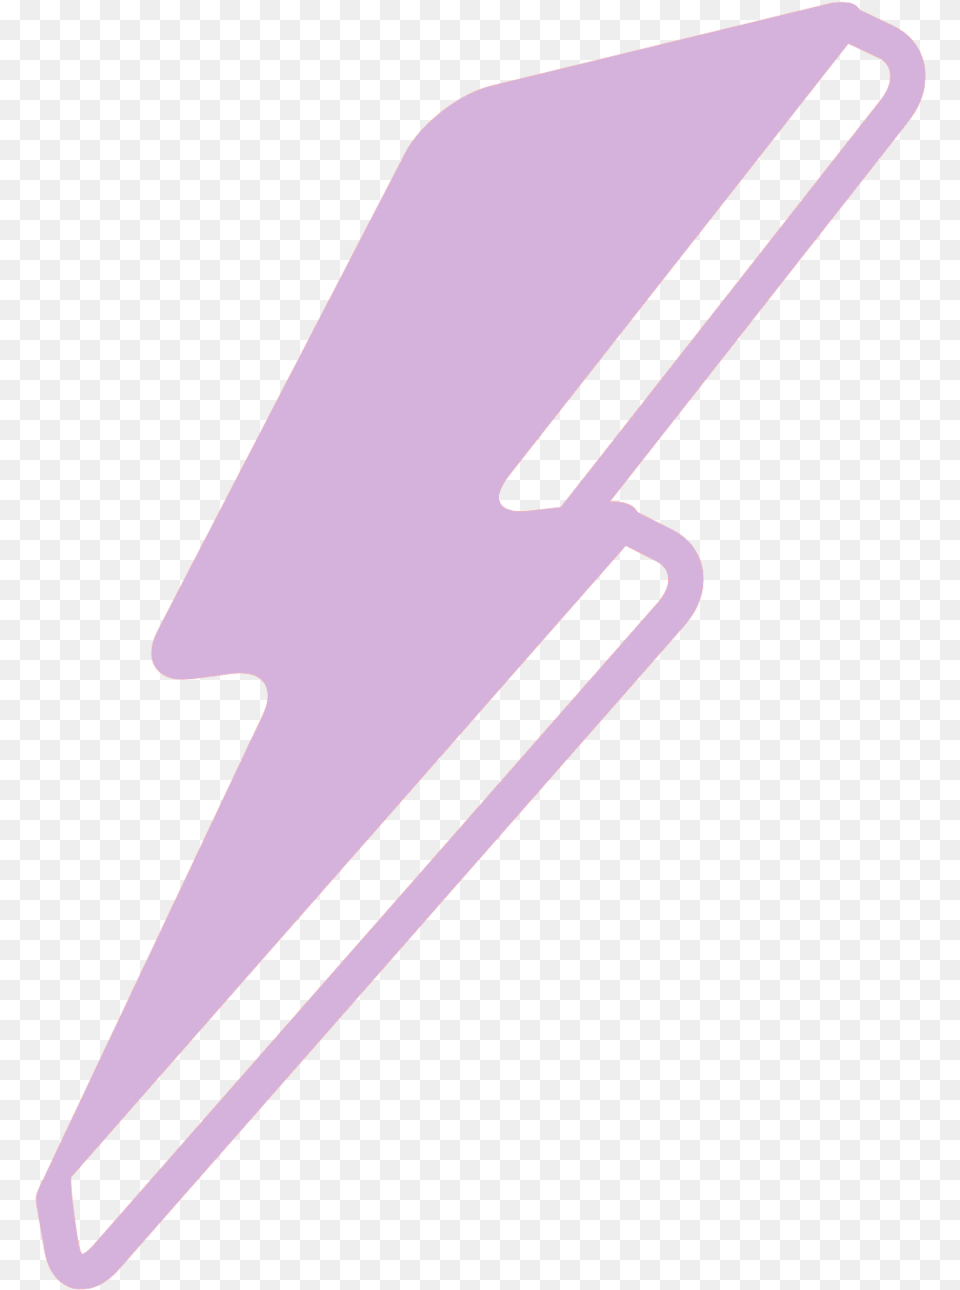 Download Purple Lightning Portable Network Graphics, Weapon, Arrow, Arrowhead, Smoke Pipe Free Transparent Png